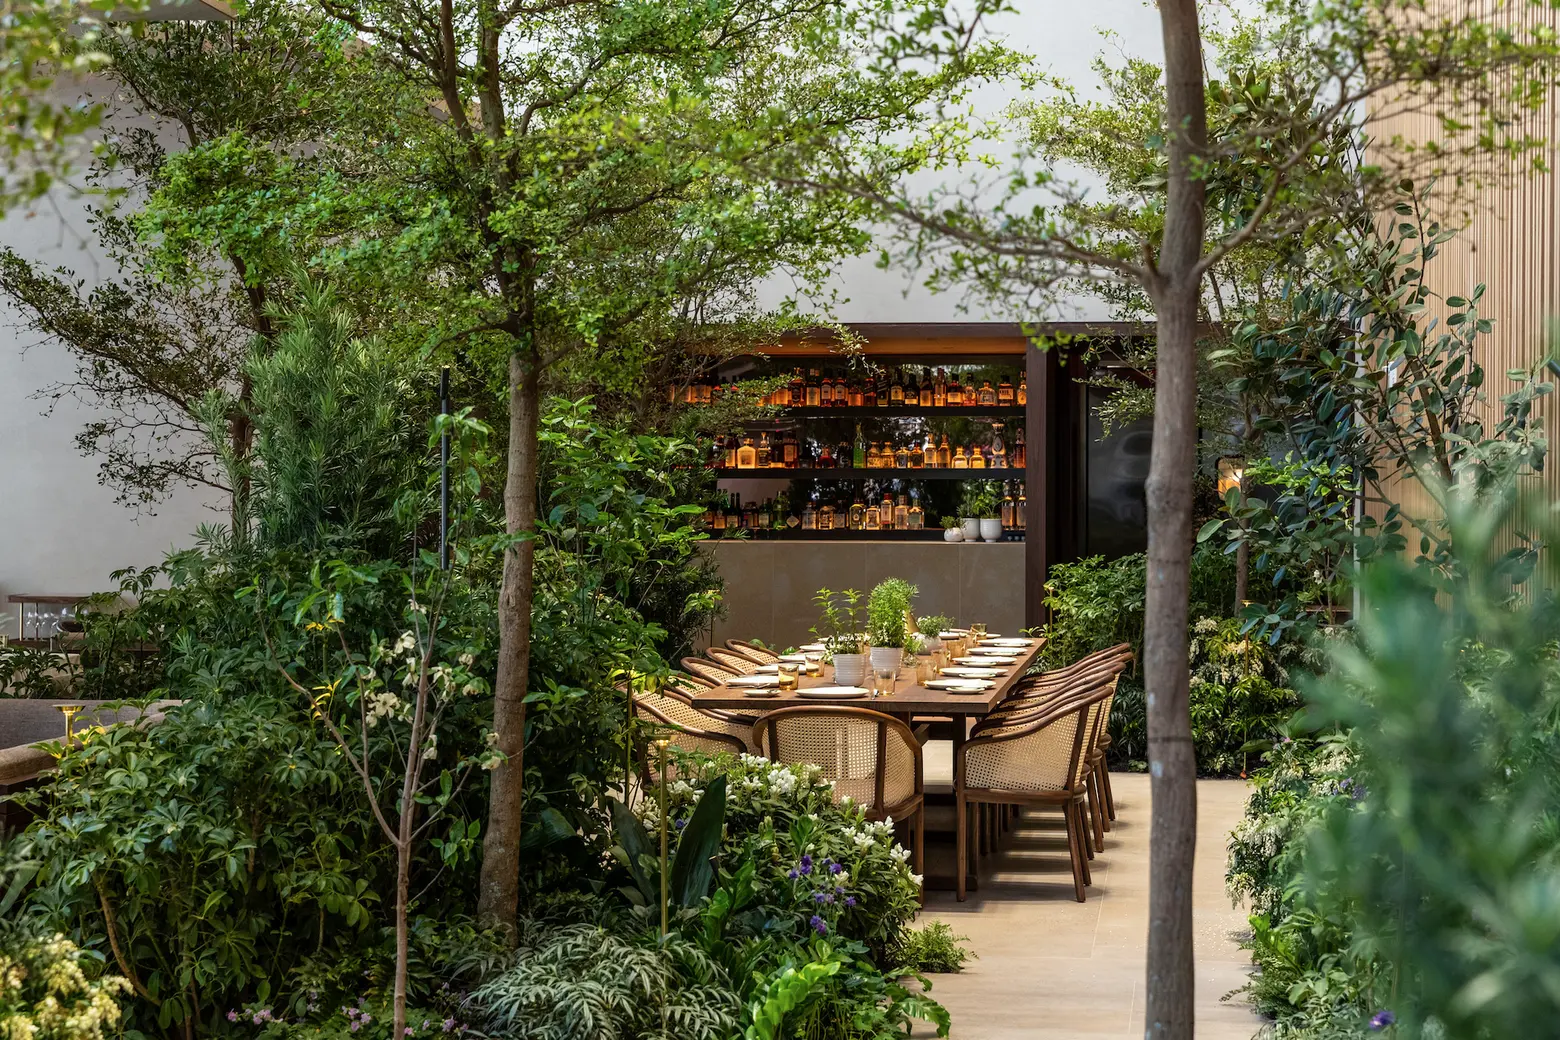 Ten lush rooftop gardens that serve as tranquil oases above the city